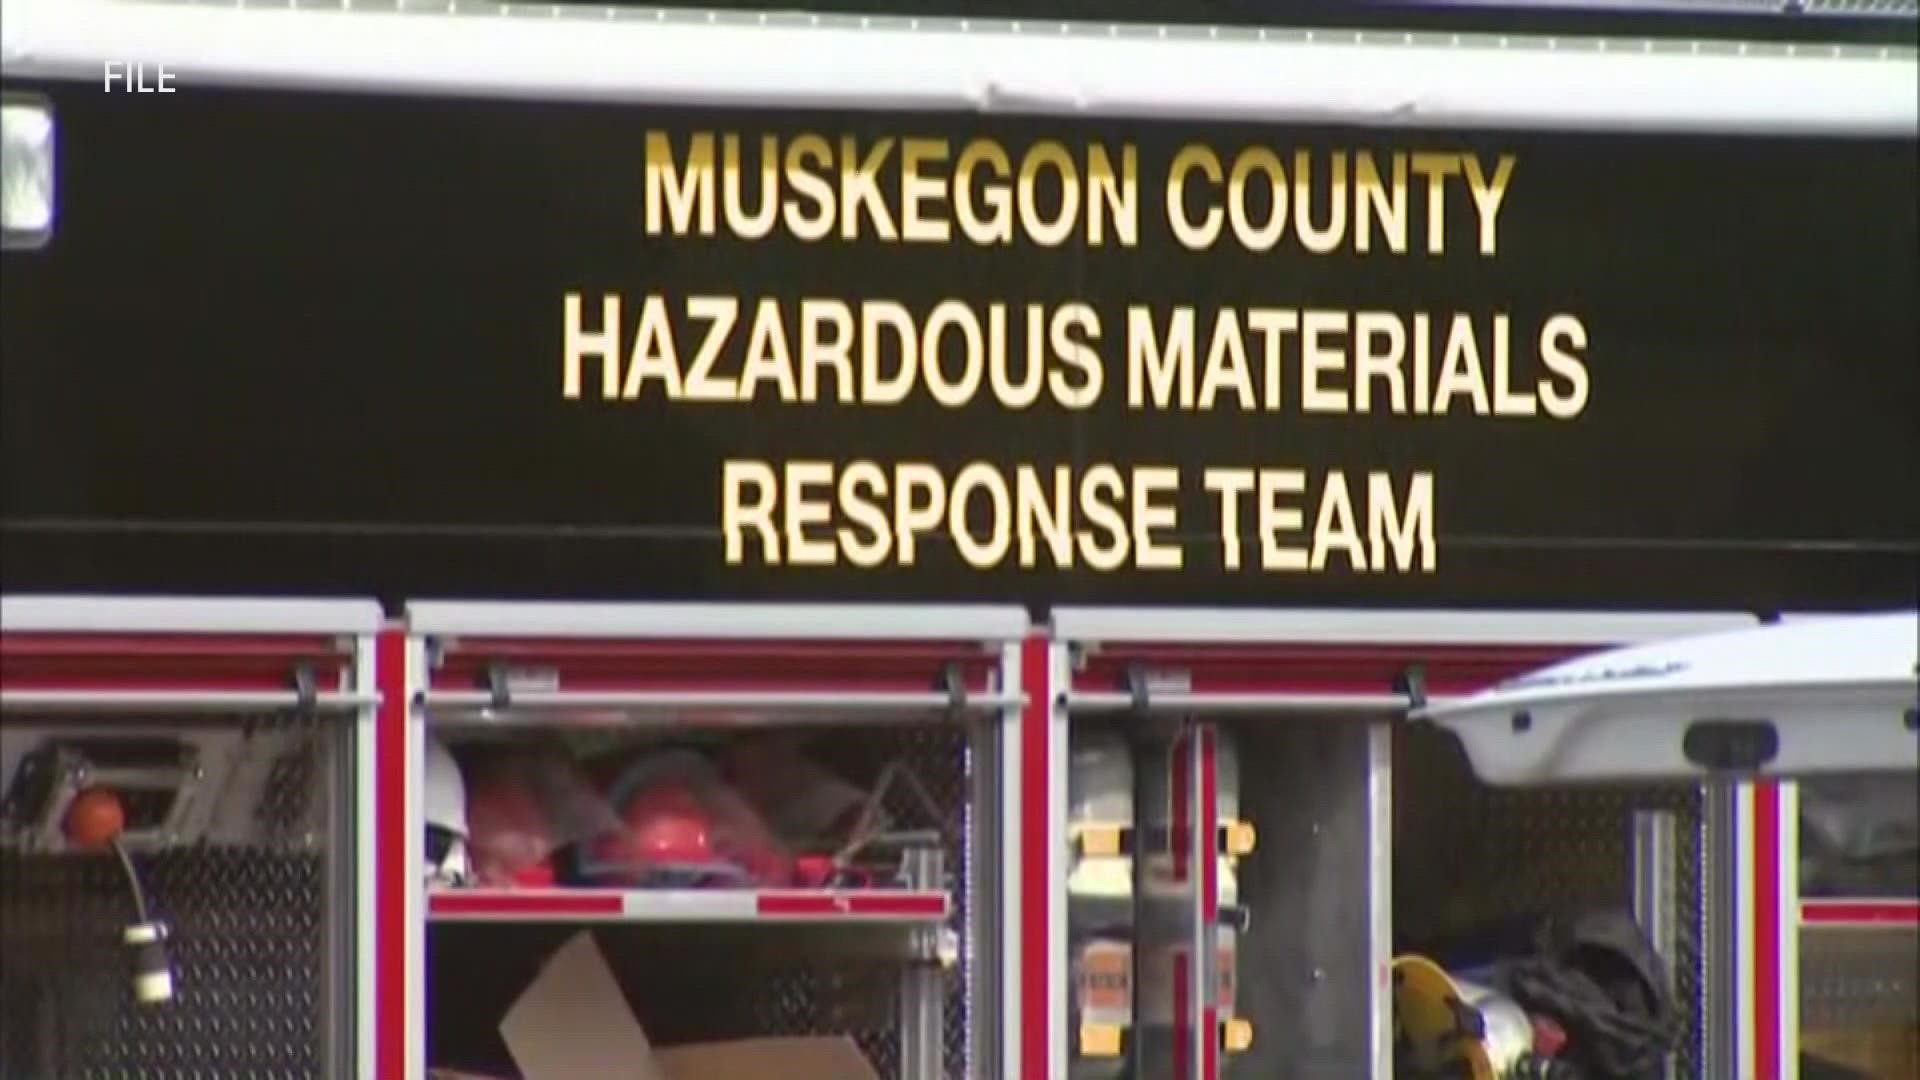 An effort is underway to dissolve the HAZMAT team in Muskegon County, and liquidate the team's assets.